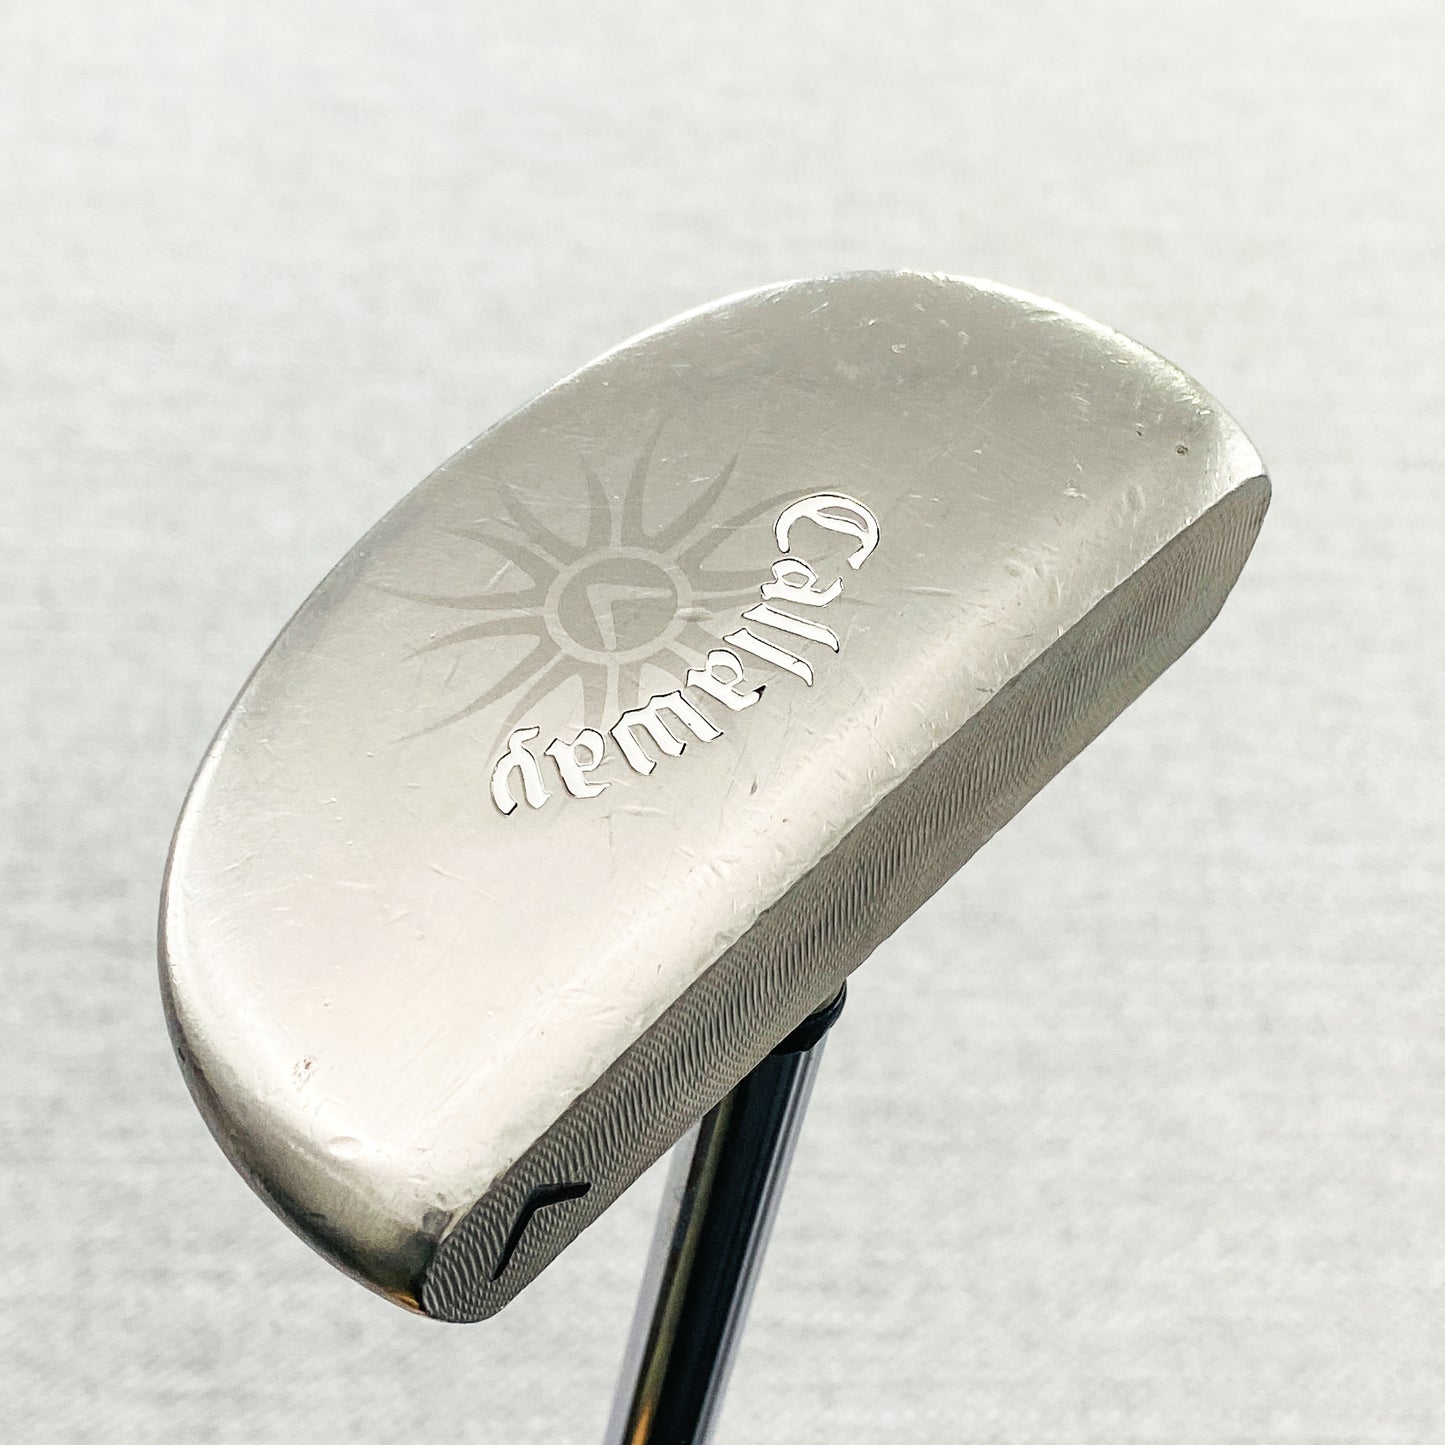 Callaway Solaire Junior Putter. 31 inch - Good Condition # 13158